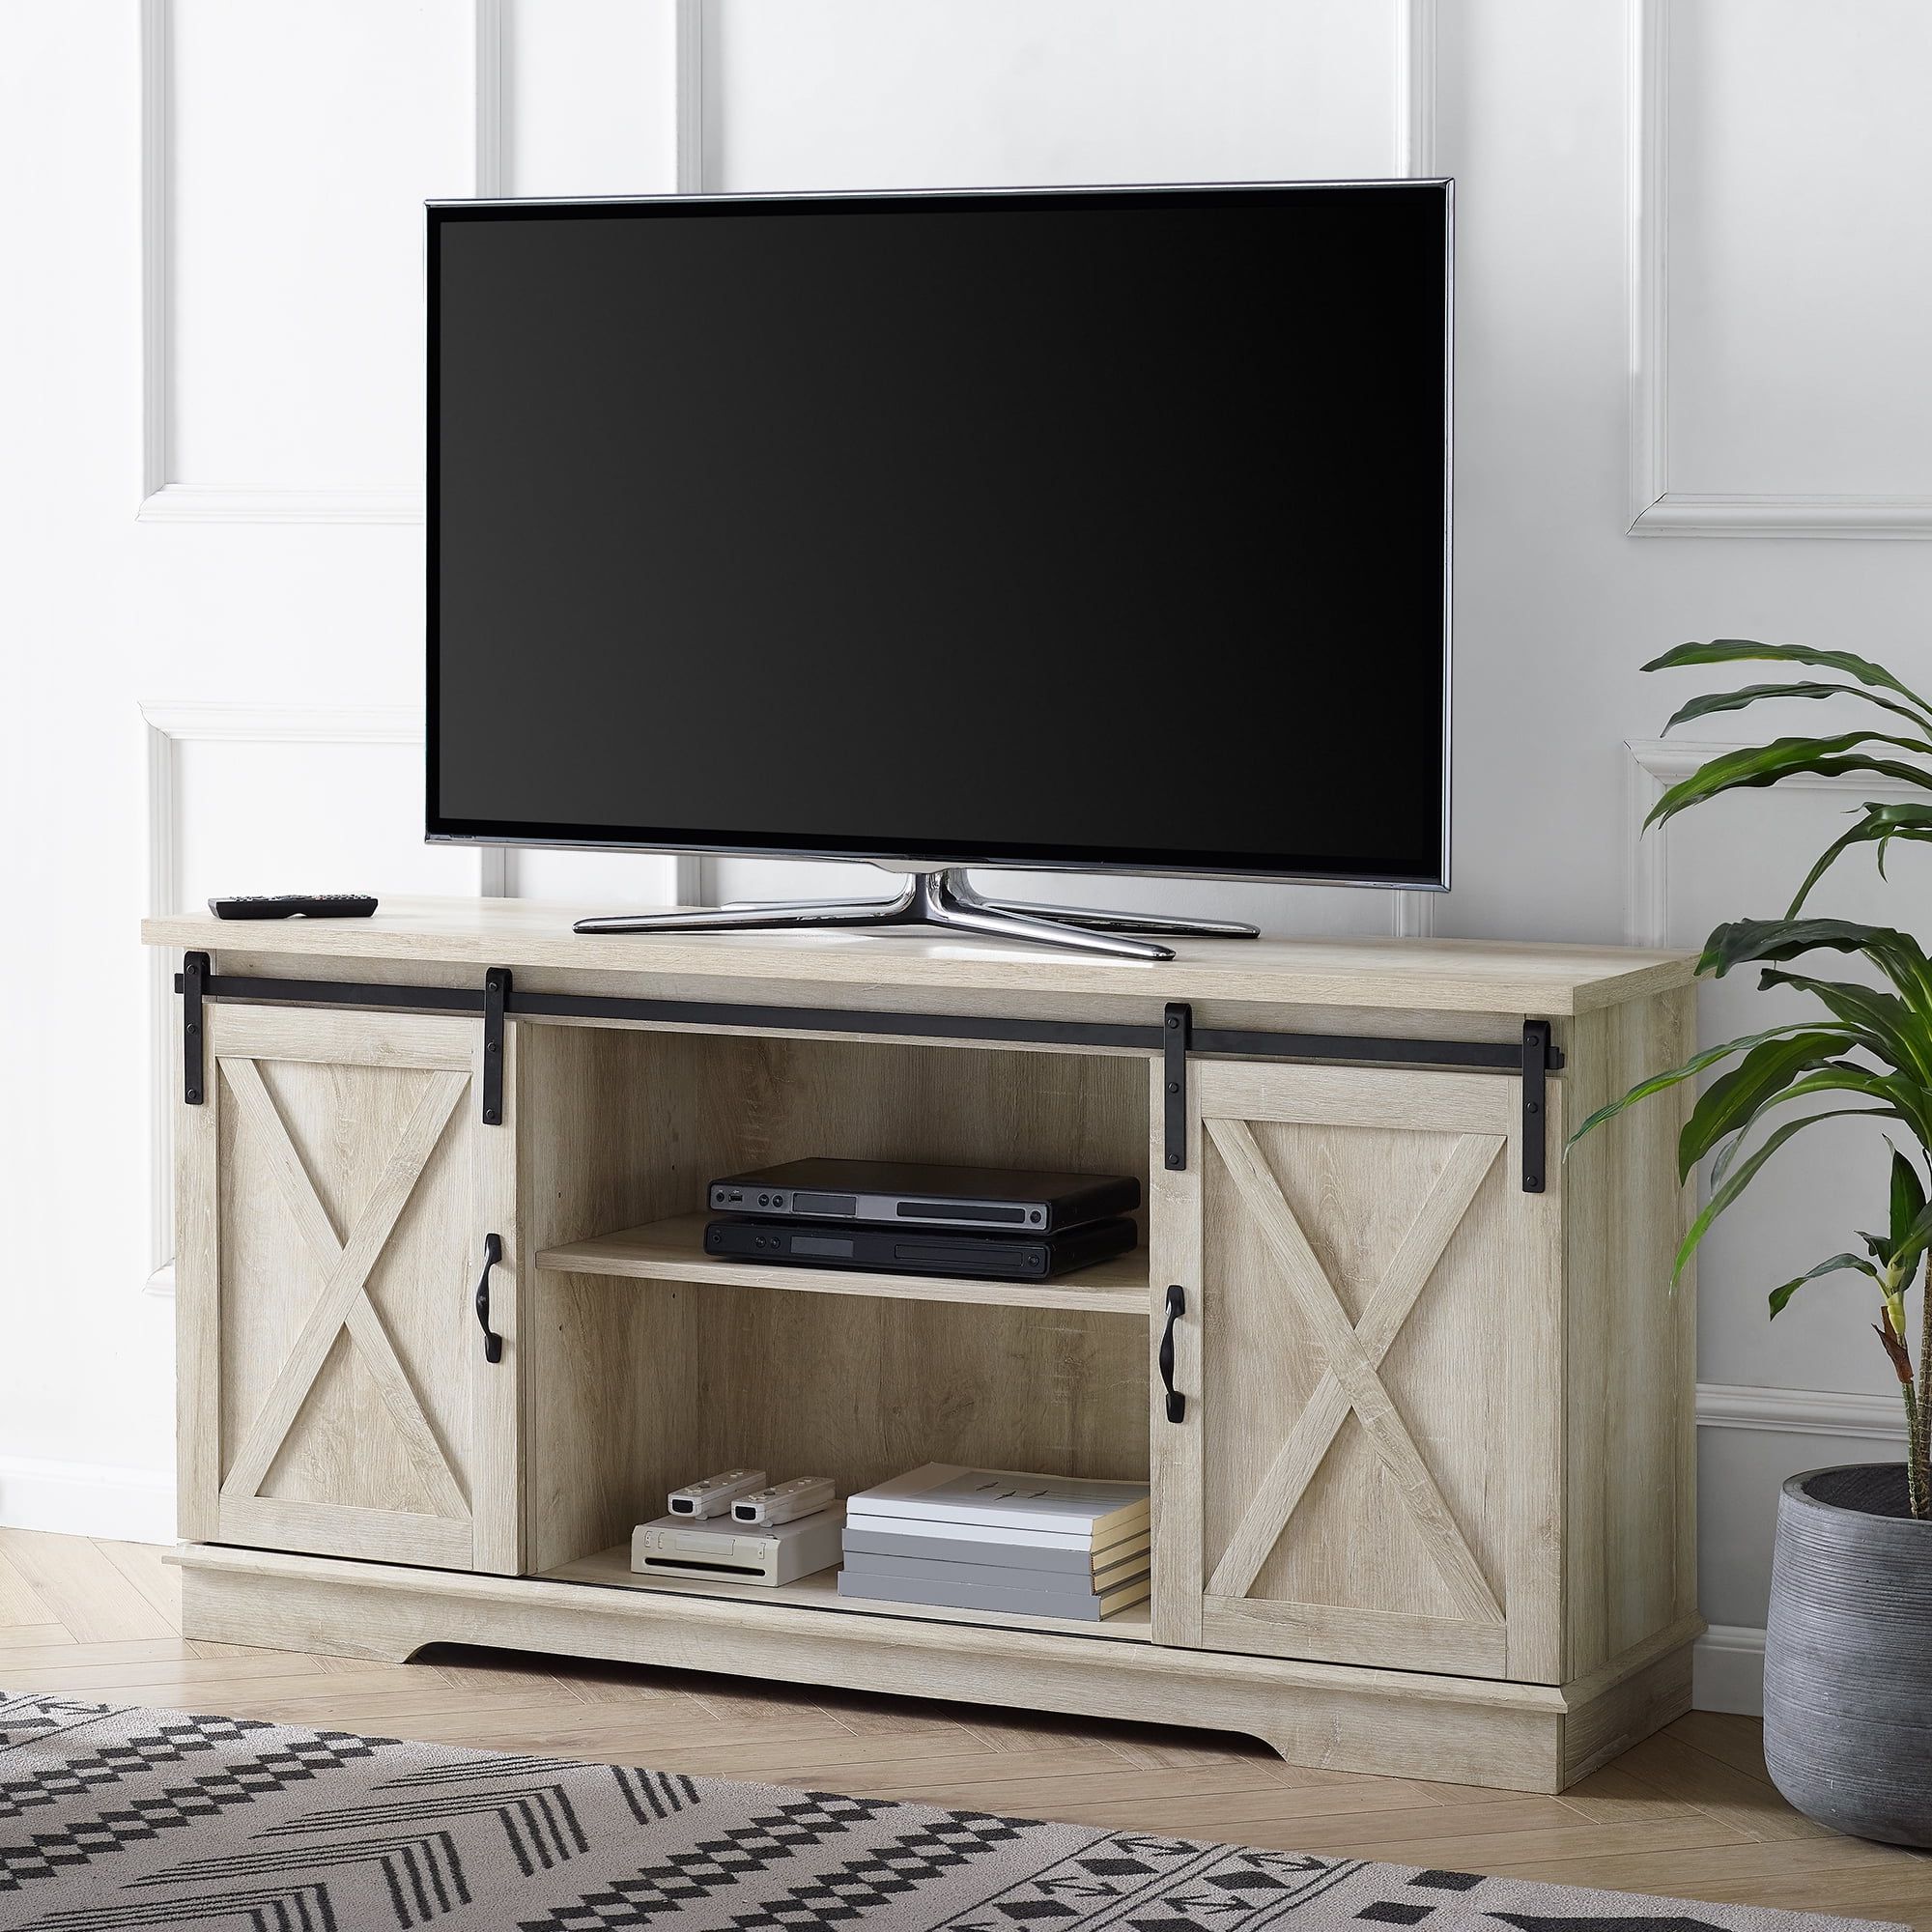 Most Recent Modern Farmhouse Barn Tv Stands With Regard To Manor Park 58" Modern Farmhouse Sliding Barn Door Tv Stand – Solid (View 9 of 15)